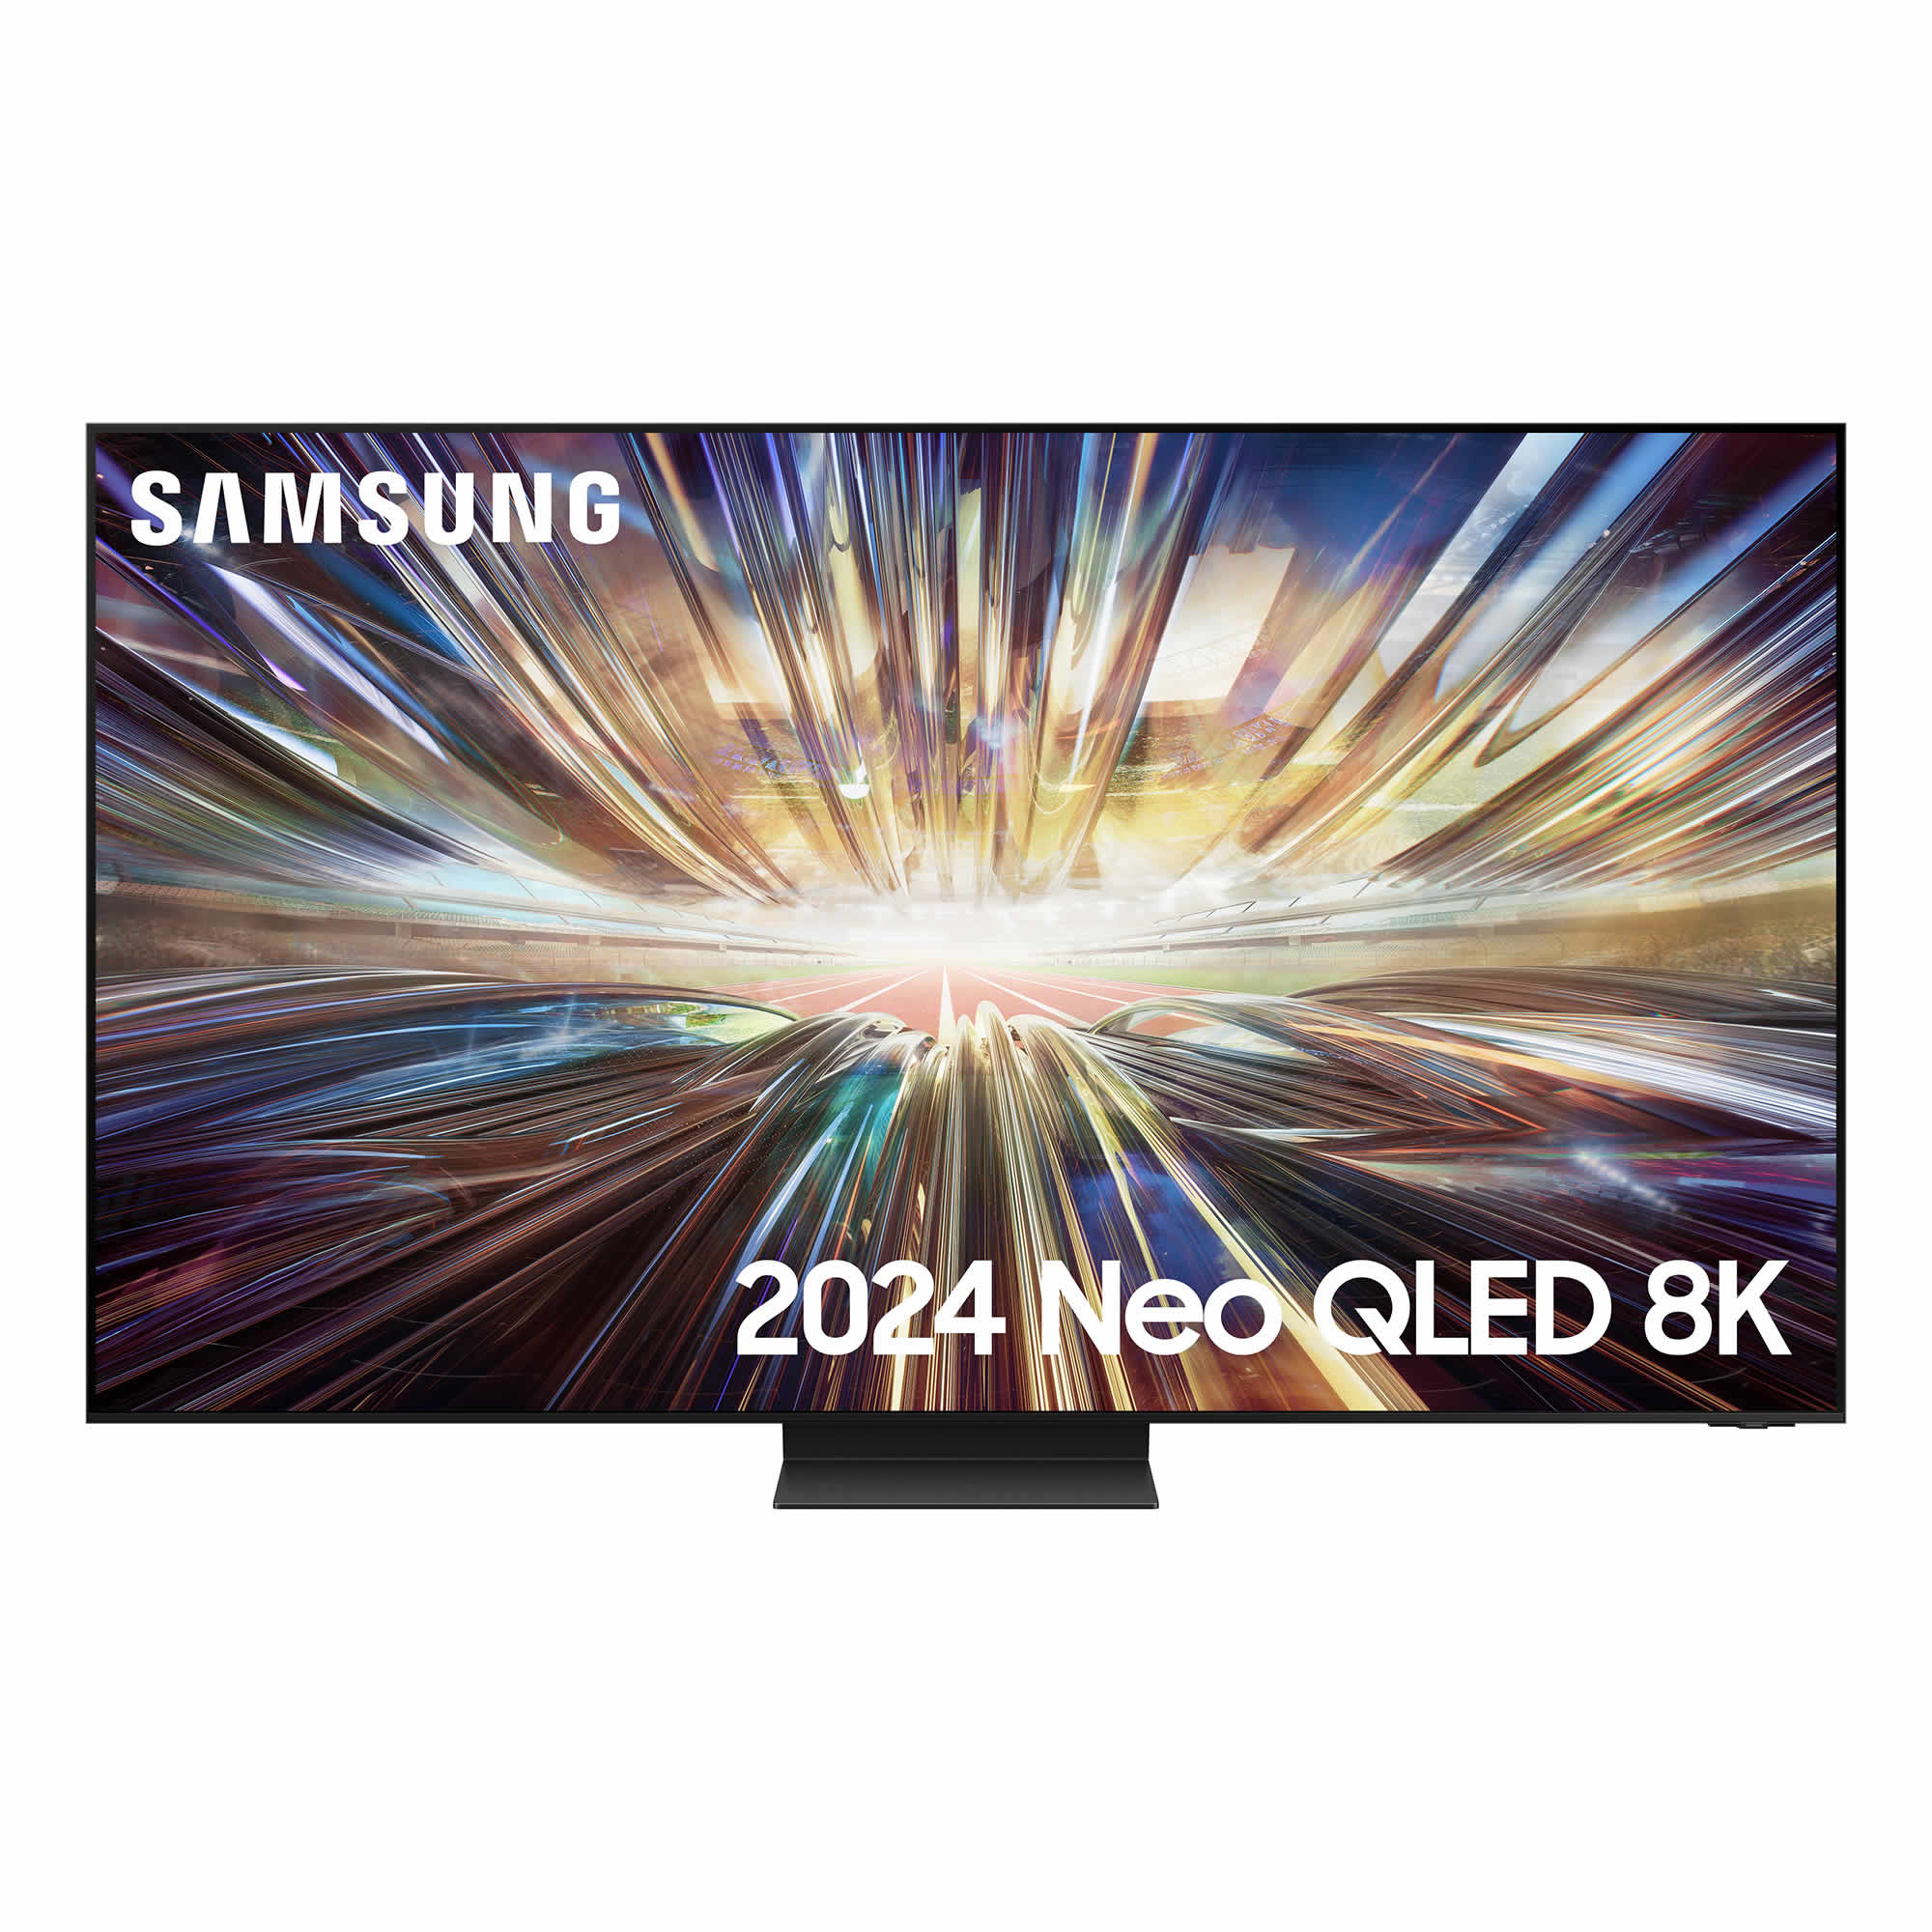 Samsung 65inch Neo QLED UHD 8K One Connect Box SMART TV WiFi